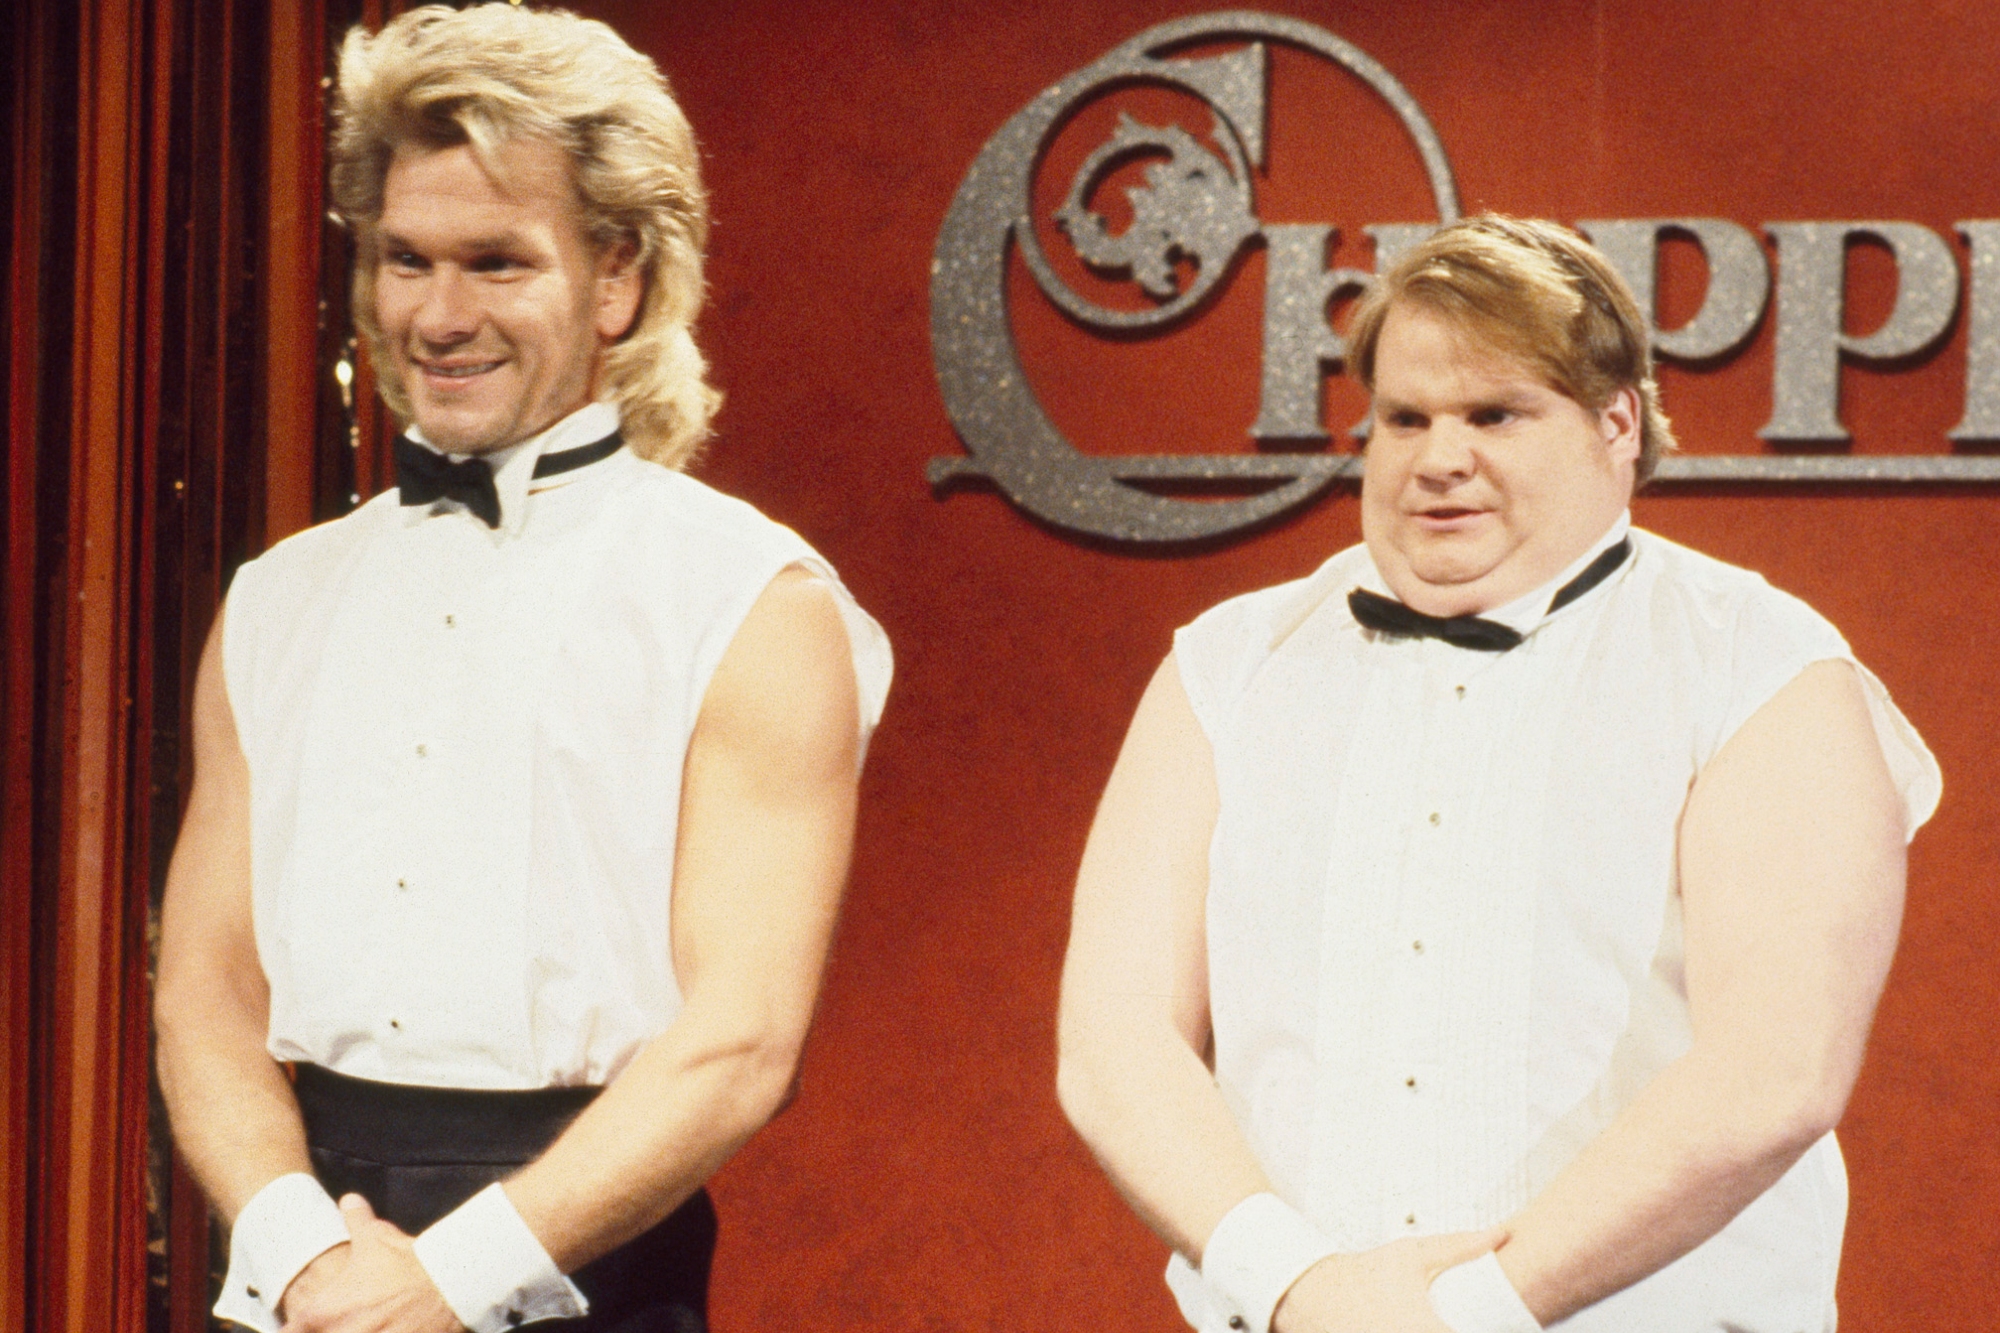 Patrick Swayze and Chris Farley’s ‘Saturday Night Live’ Fan-Favorite Sketch Offended Cast Members: ‘I Always Hated It’